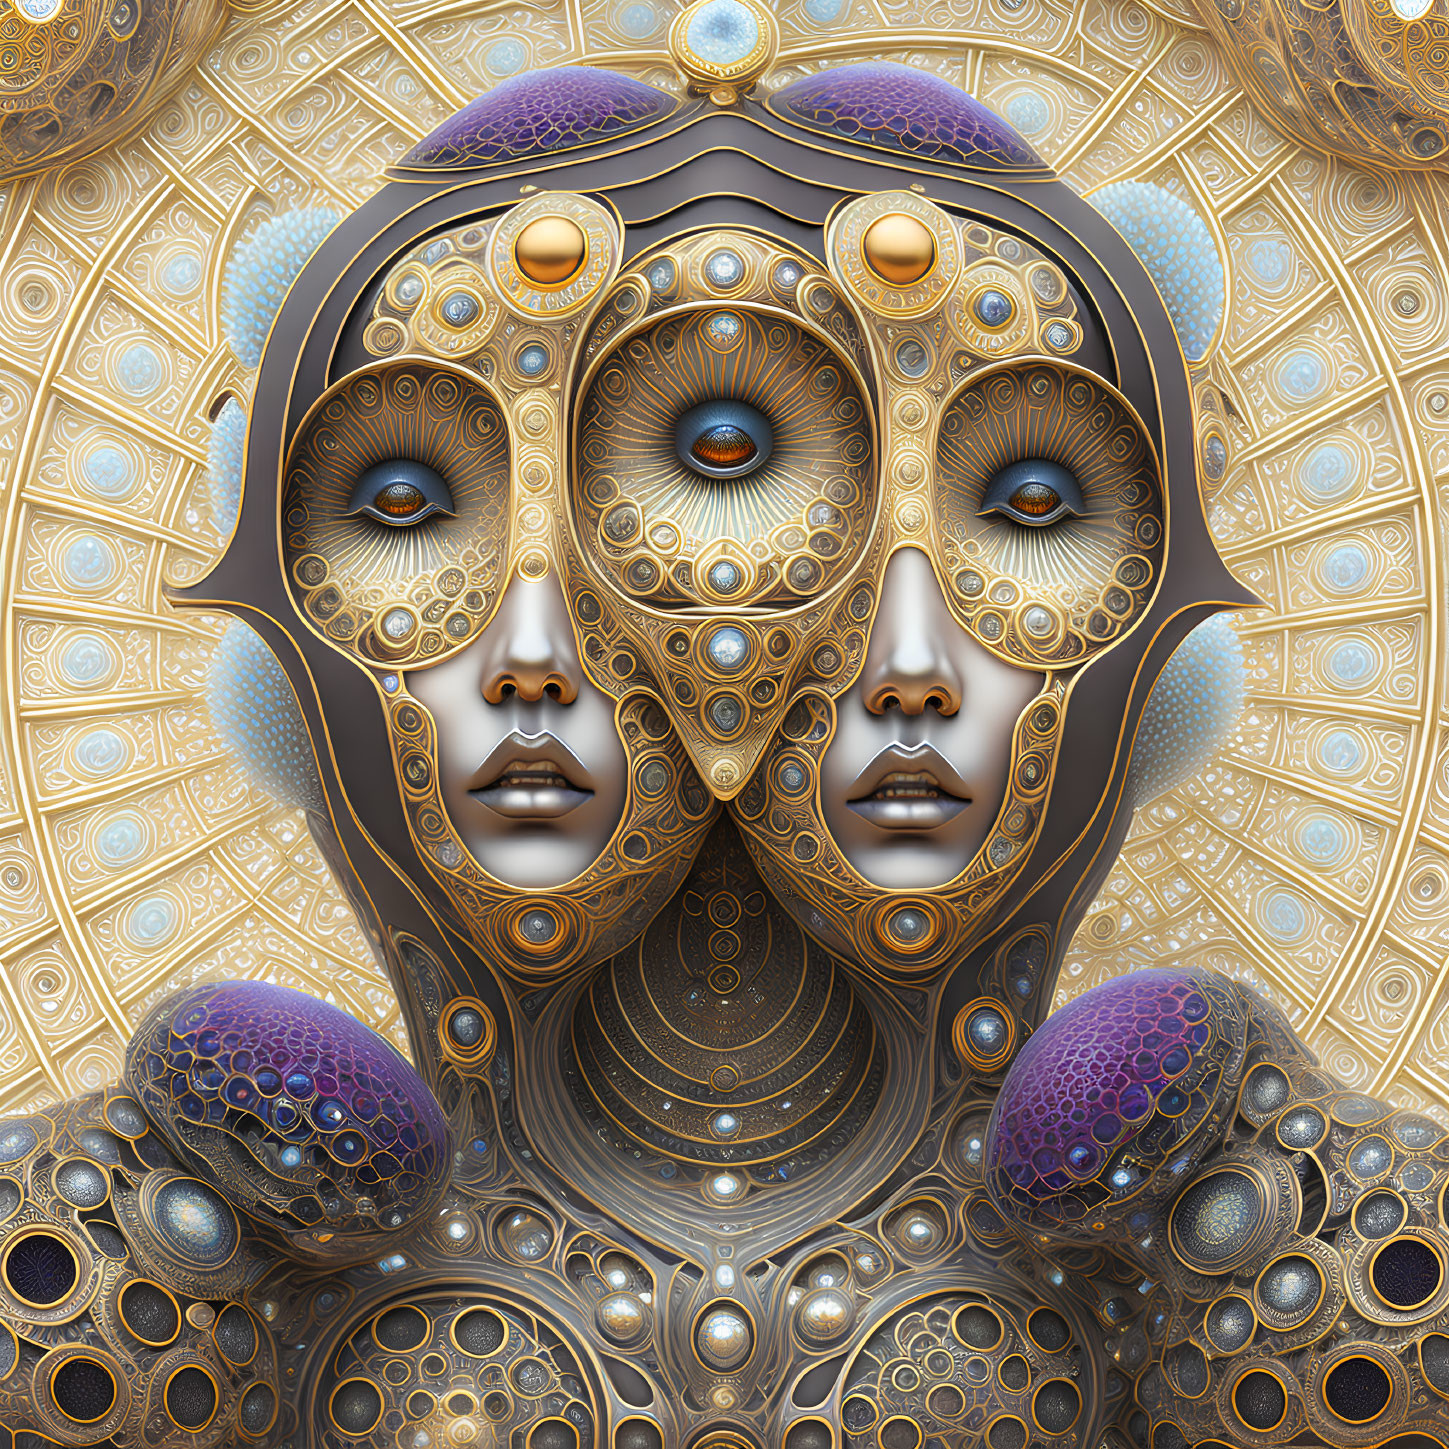 Symmetrical digital artwork with humanoid faces and golden patterns